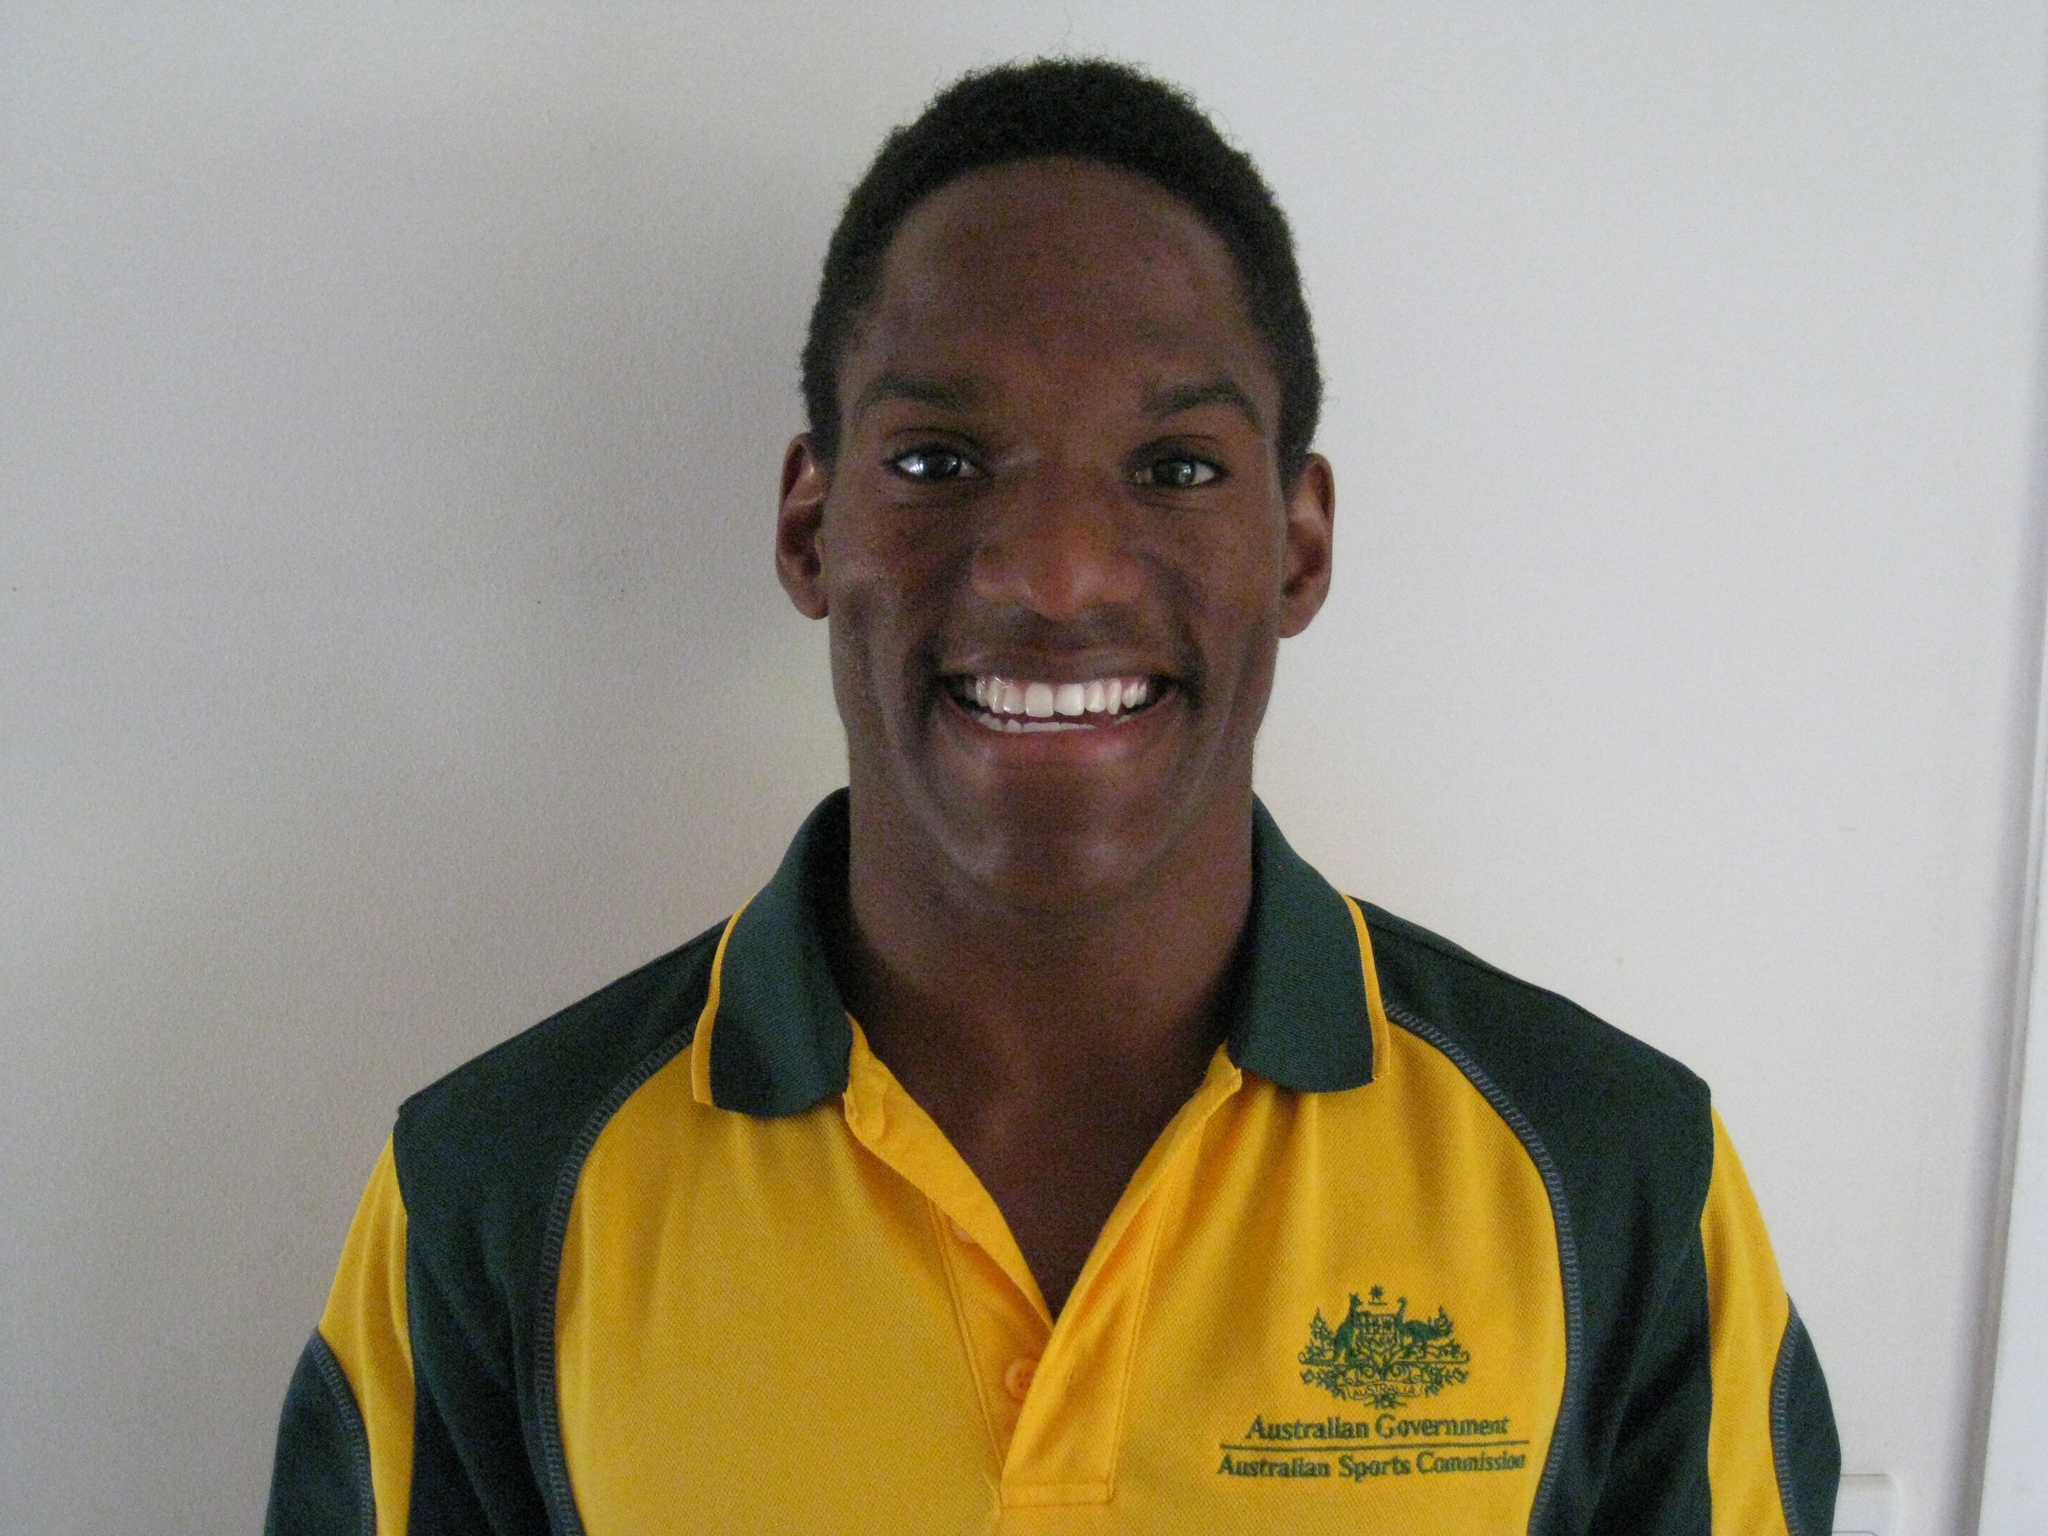 Alberto Campbell-Staines has encouraged athletes to remain active ©Virtus